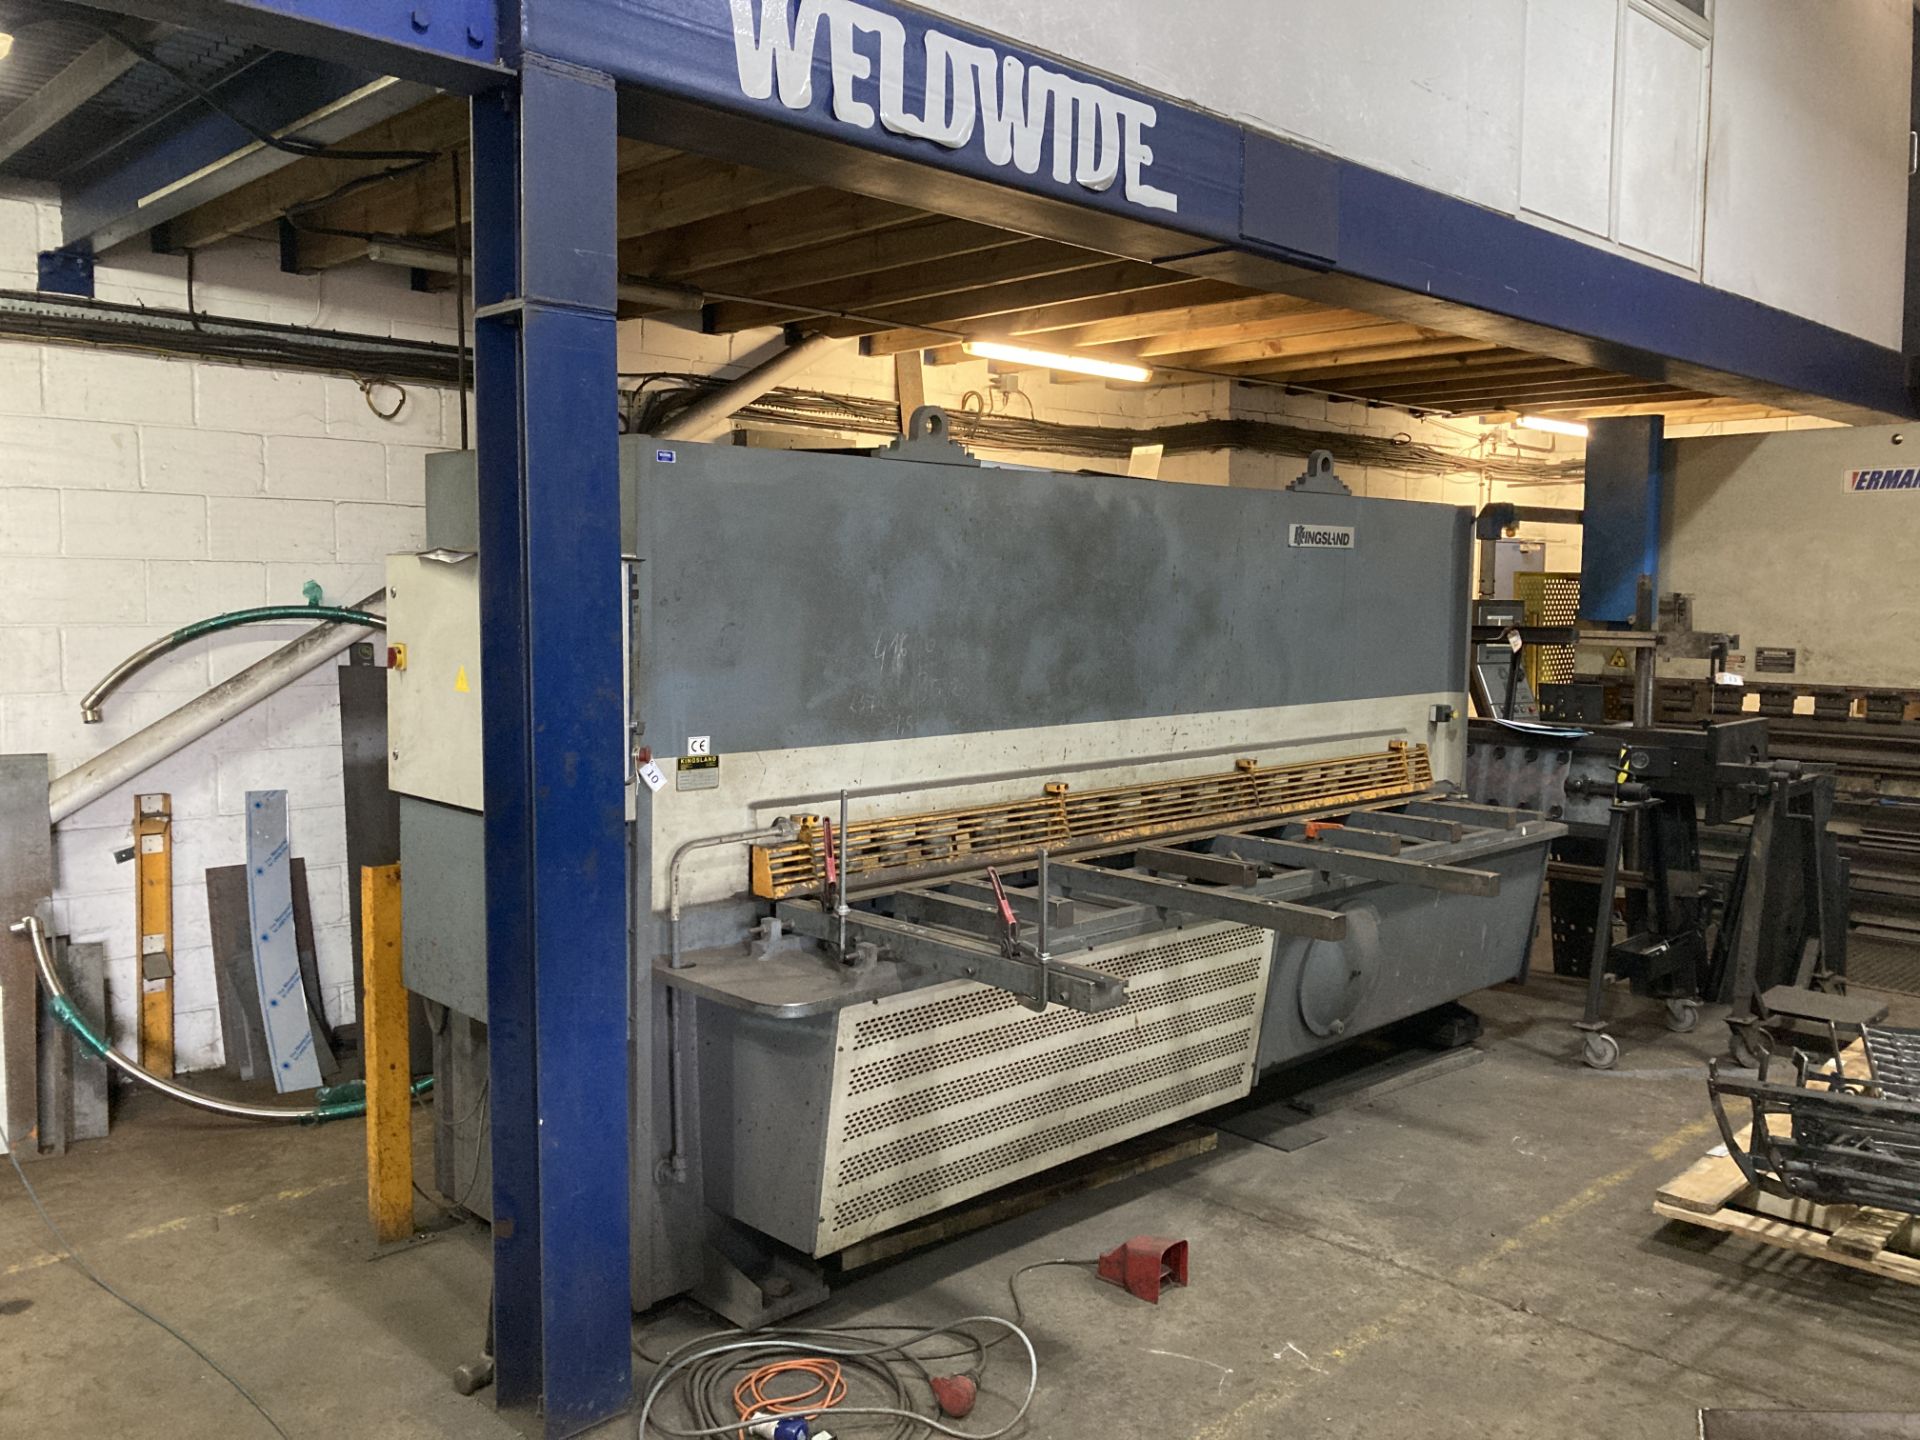 Kingsland KTXS3012 hydraulic guillotine 3m x 12mm capacity, year 2002, serial no. 69592 with SC7